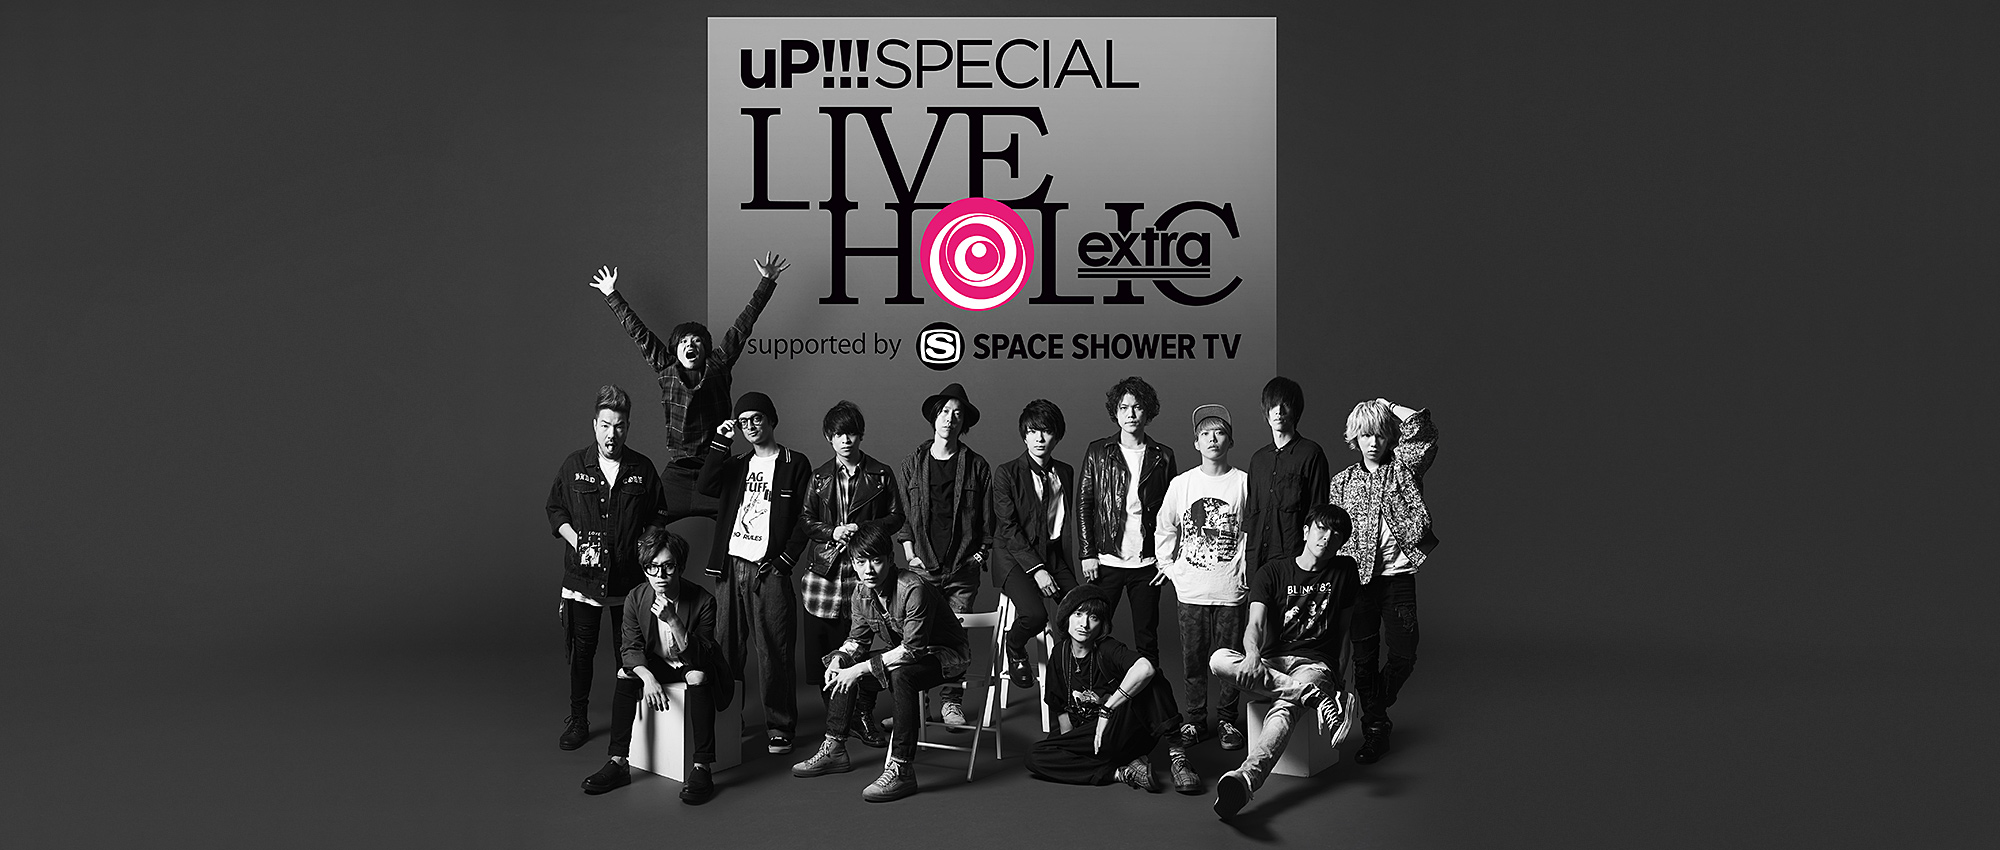 uP!!!SPECIAL LIVE HOLIC extra supported by SPACE SHOWER TV